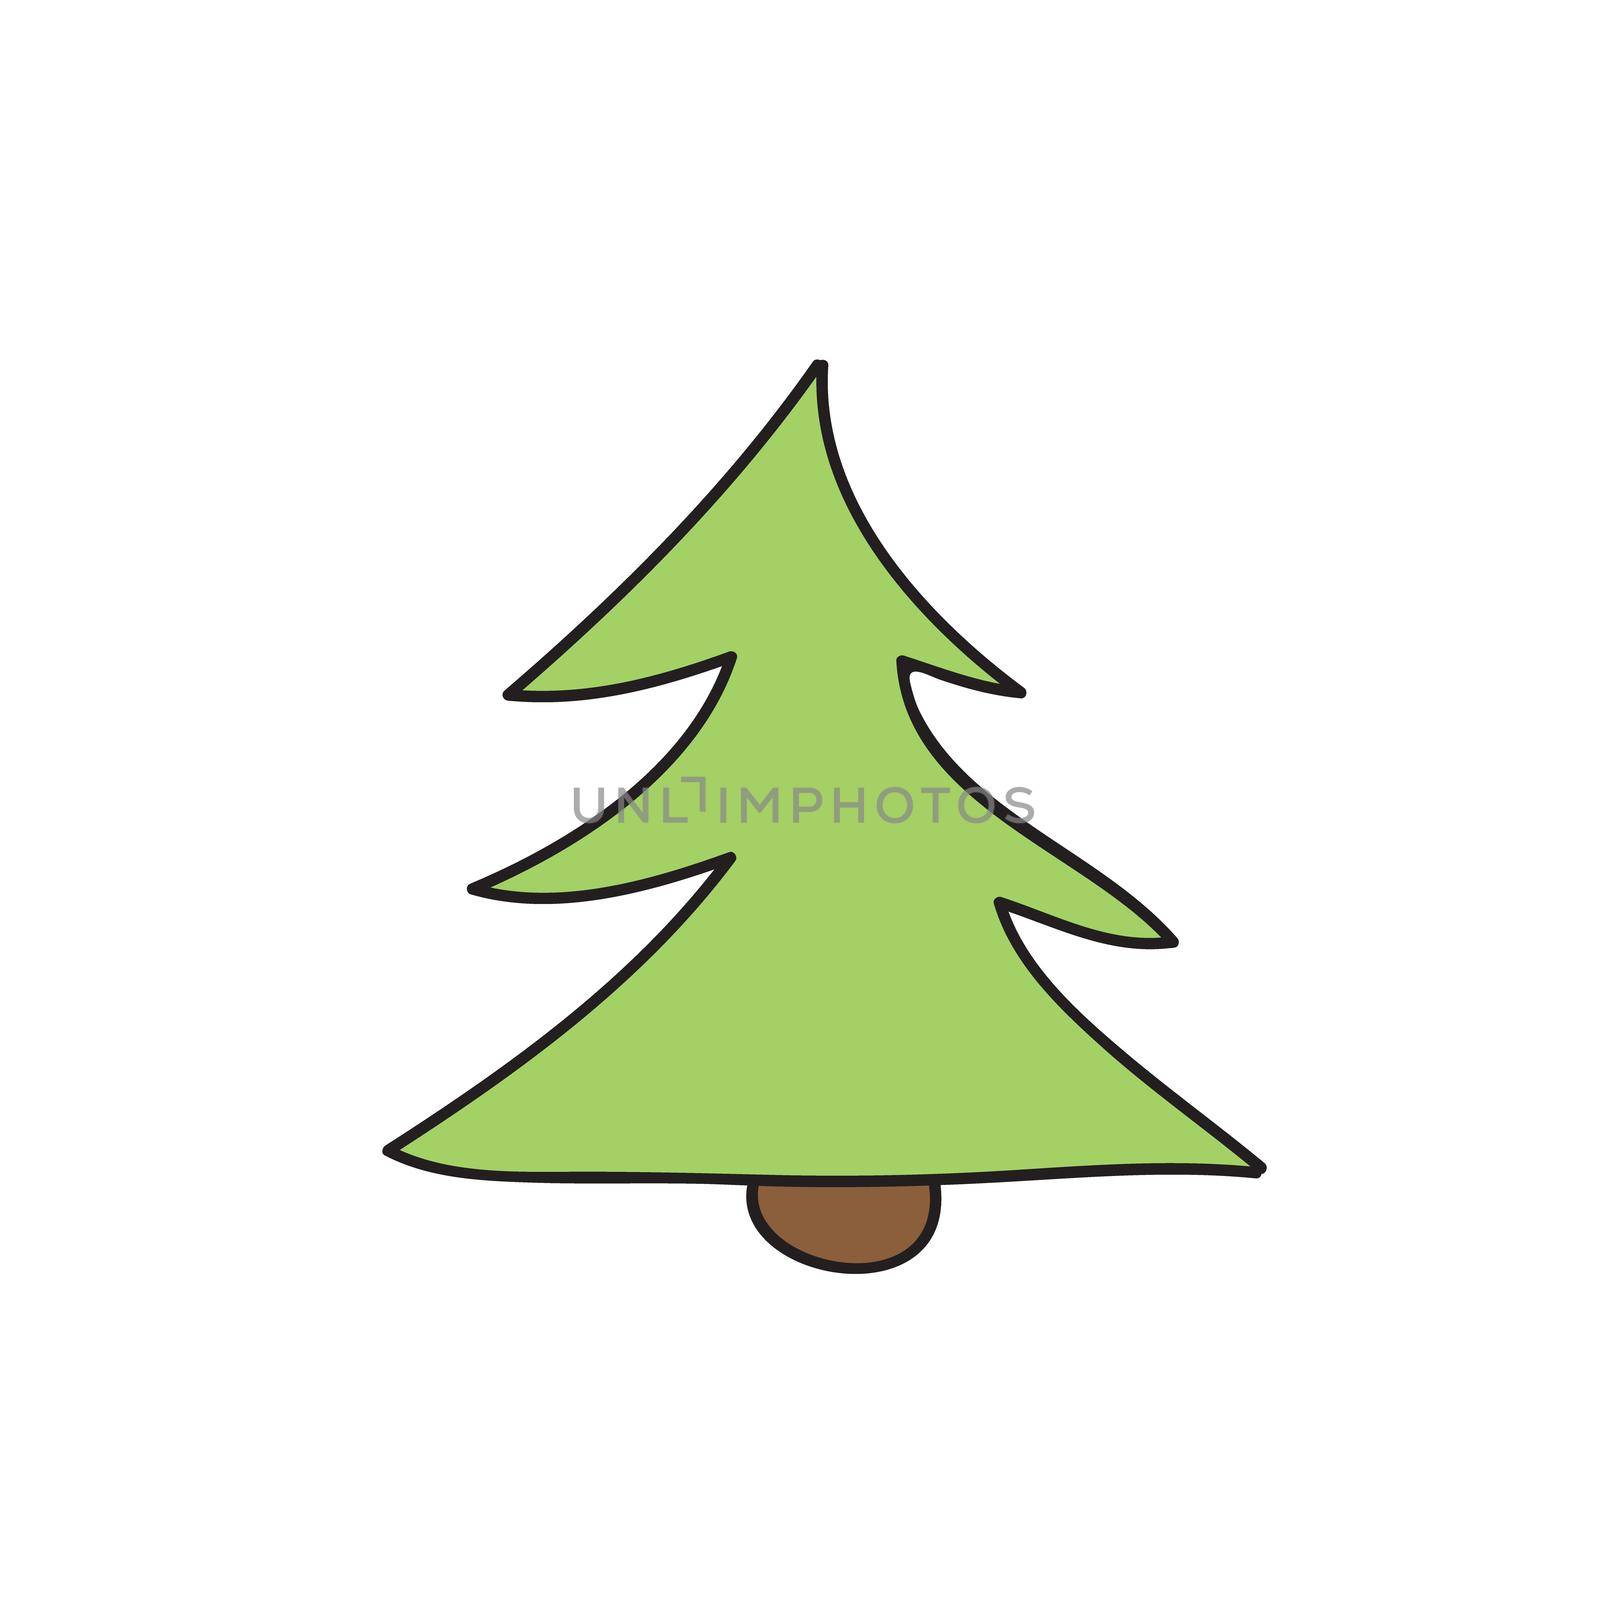 Fir tree simple cartoon icon. Vector illustration on a white background. Hand drawn element